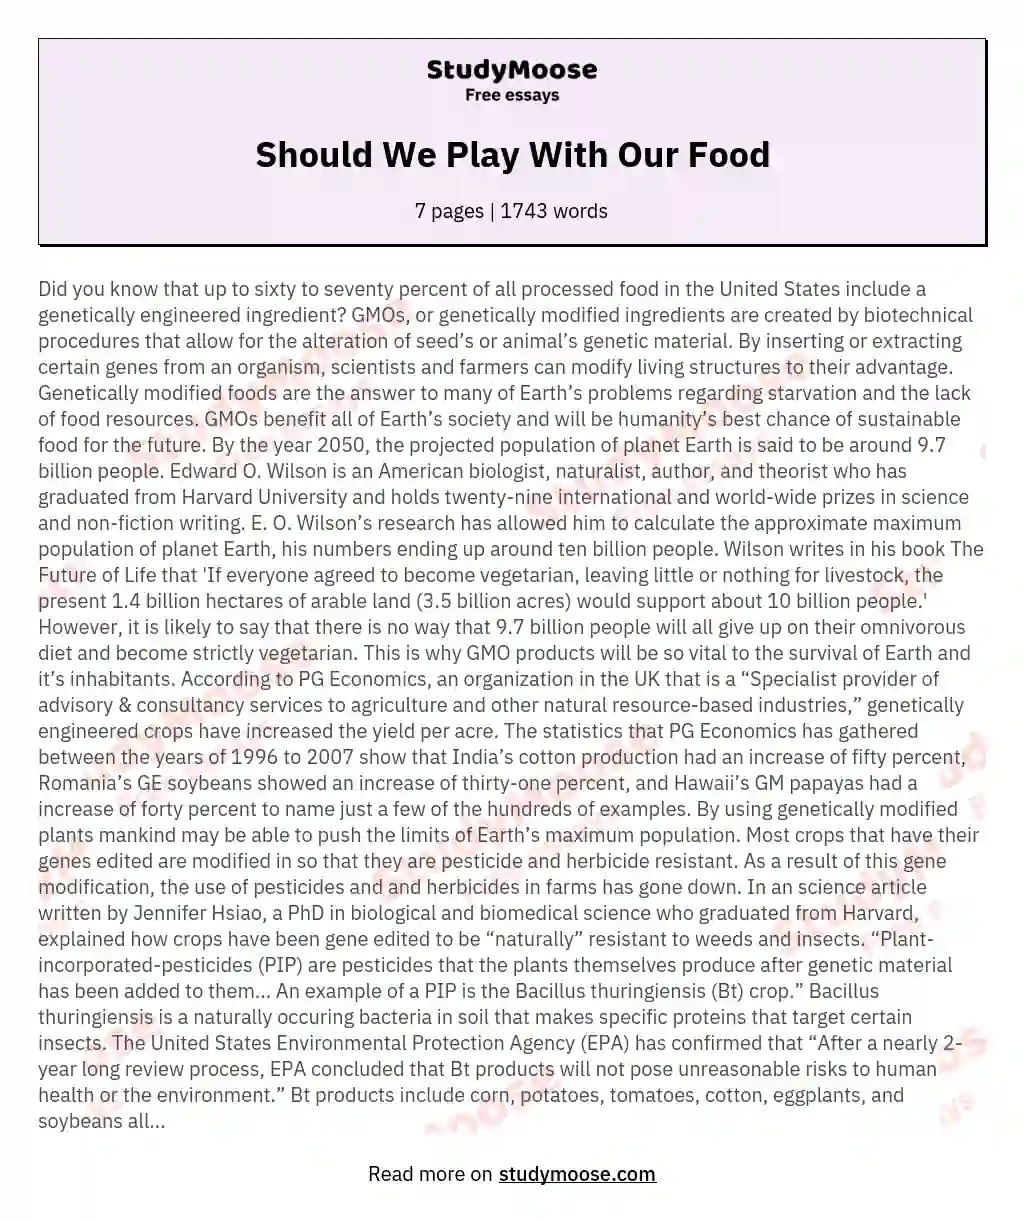 Should We Play With Our Food essay